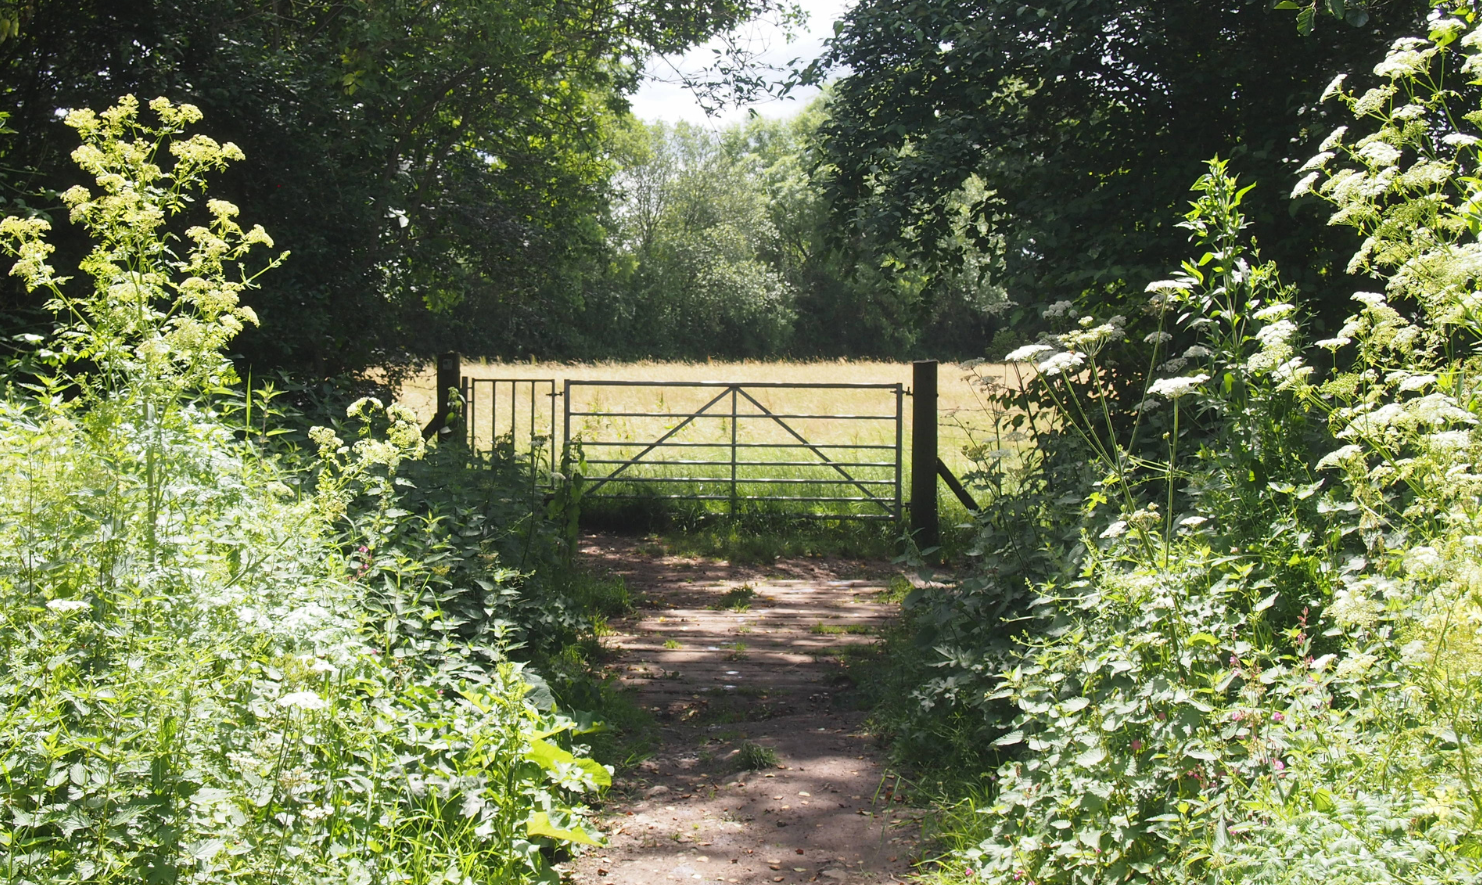 A bridge in the foreground leading to a gate, which leads in to an open field. The track is sandwiched by hedges.